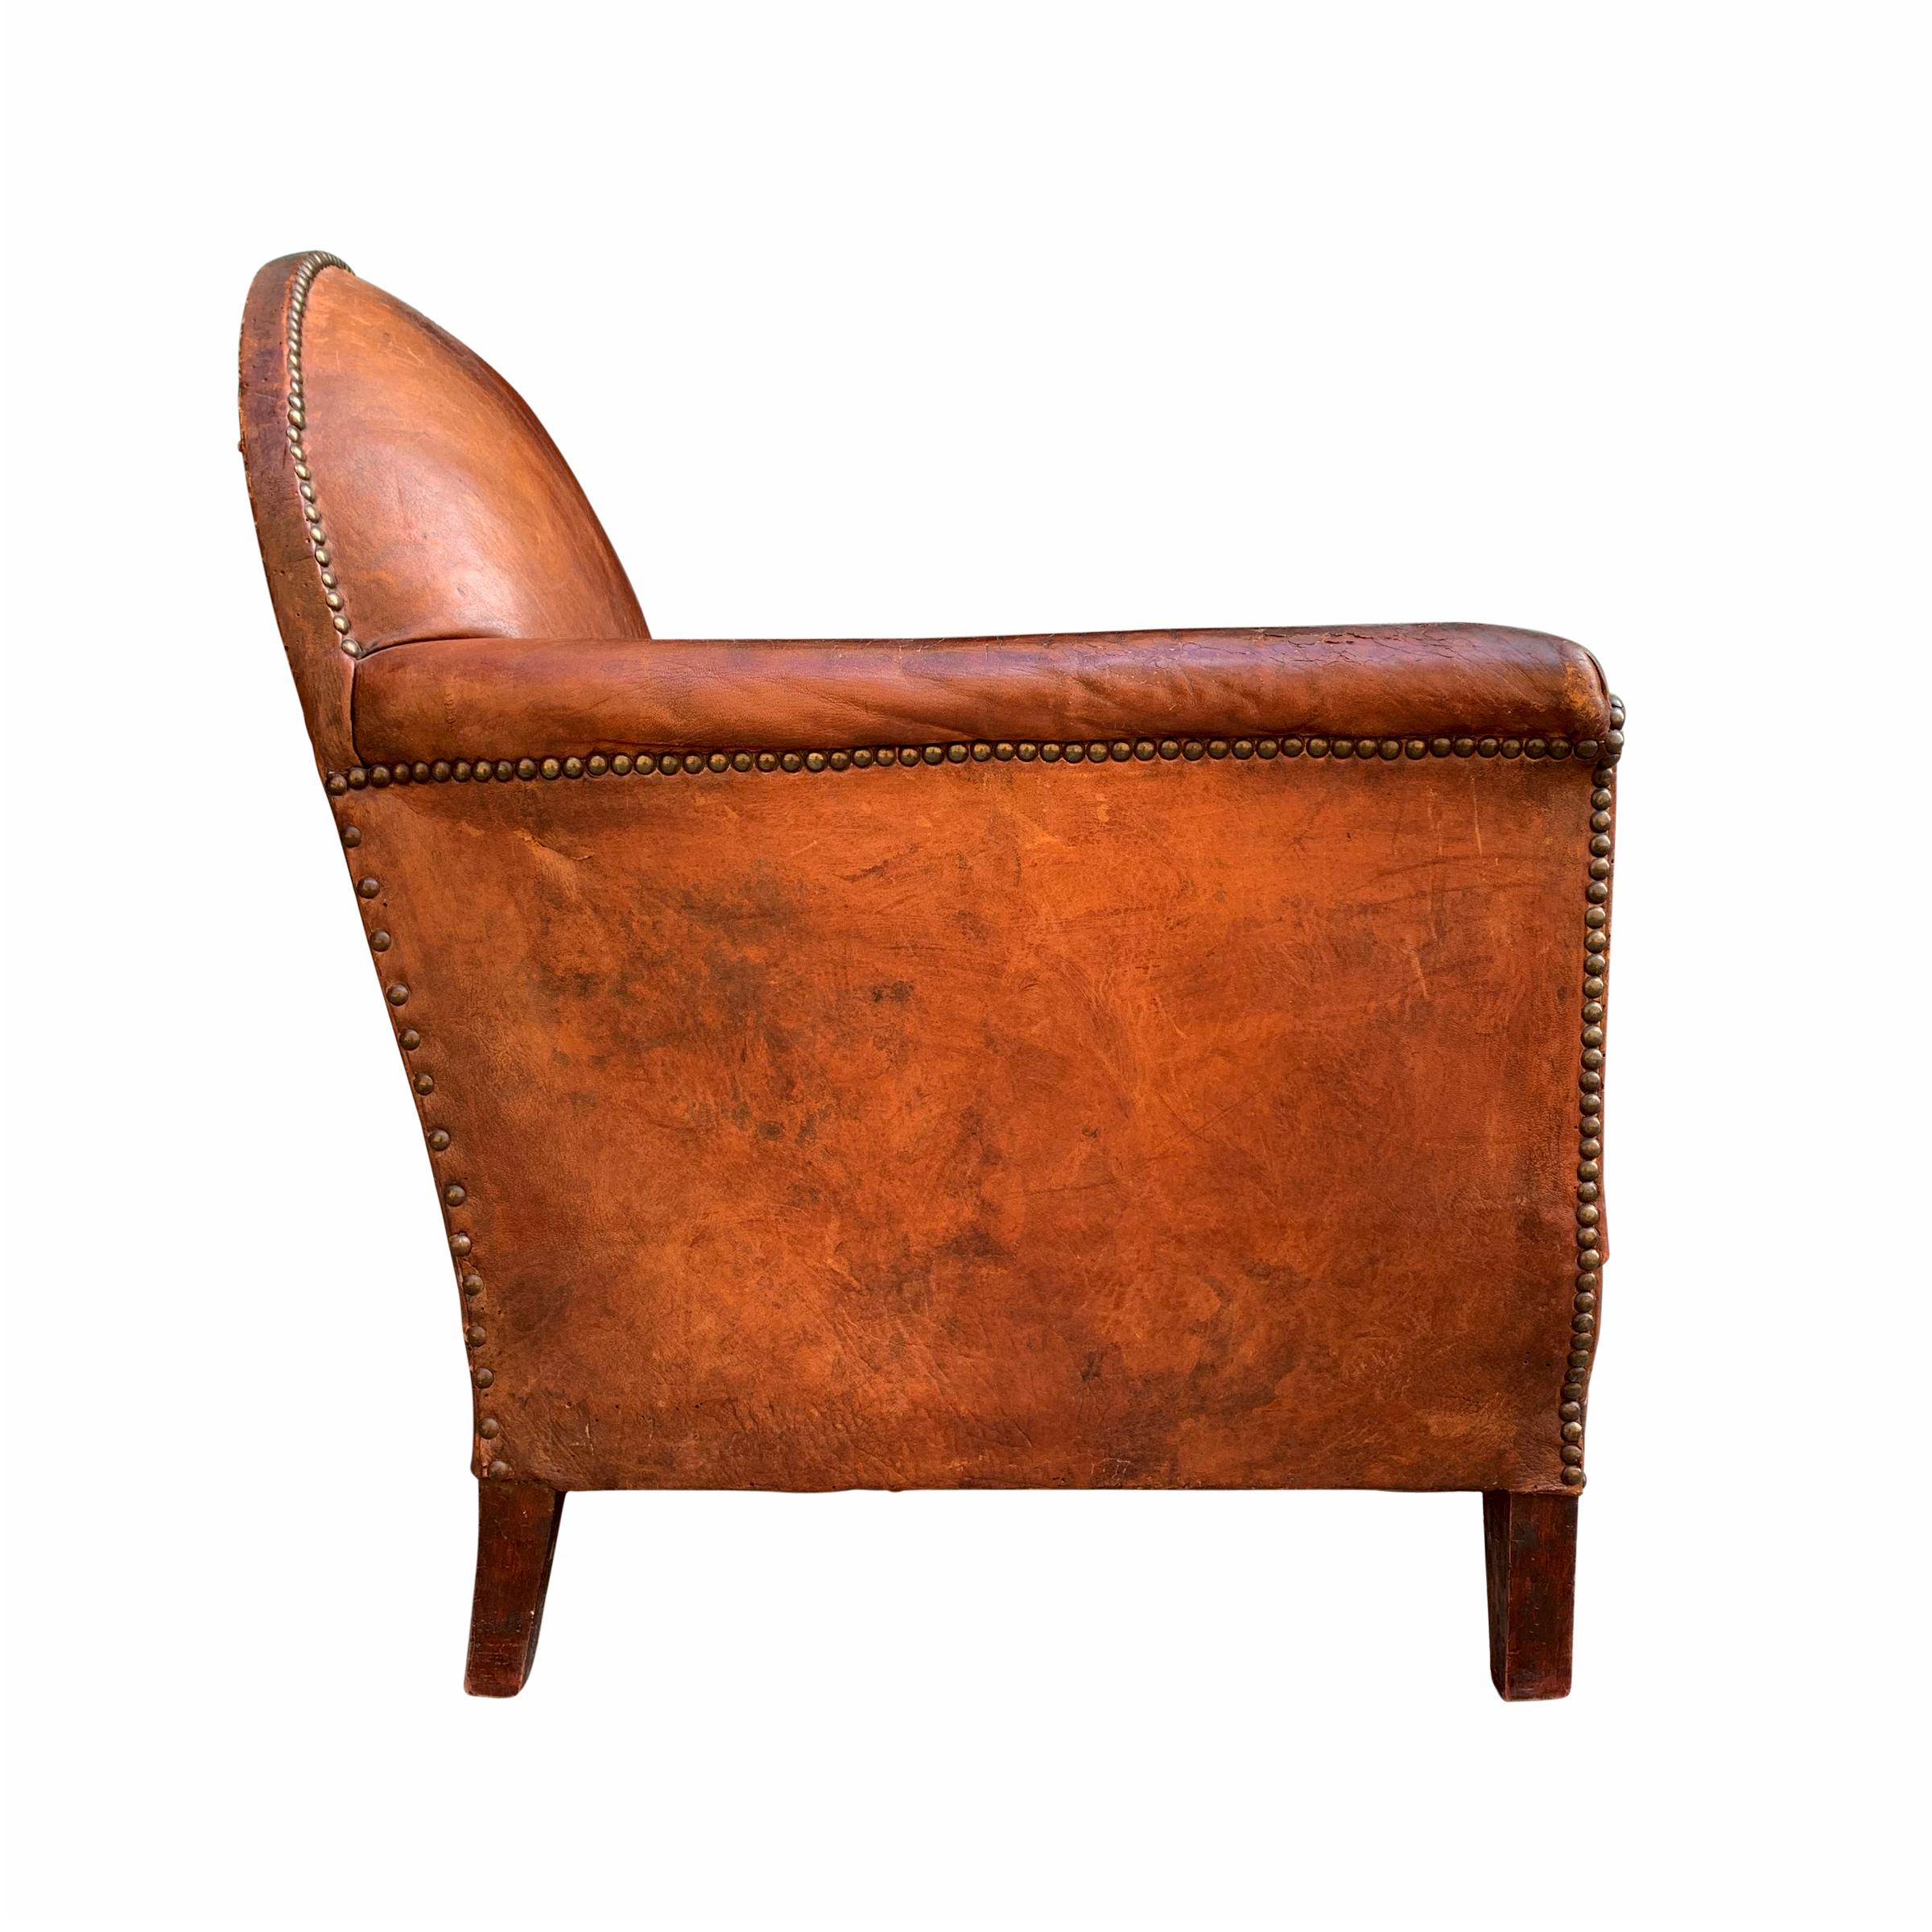 Early 20th Century French Art Deco Leather Club Chair